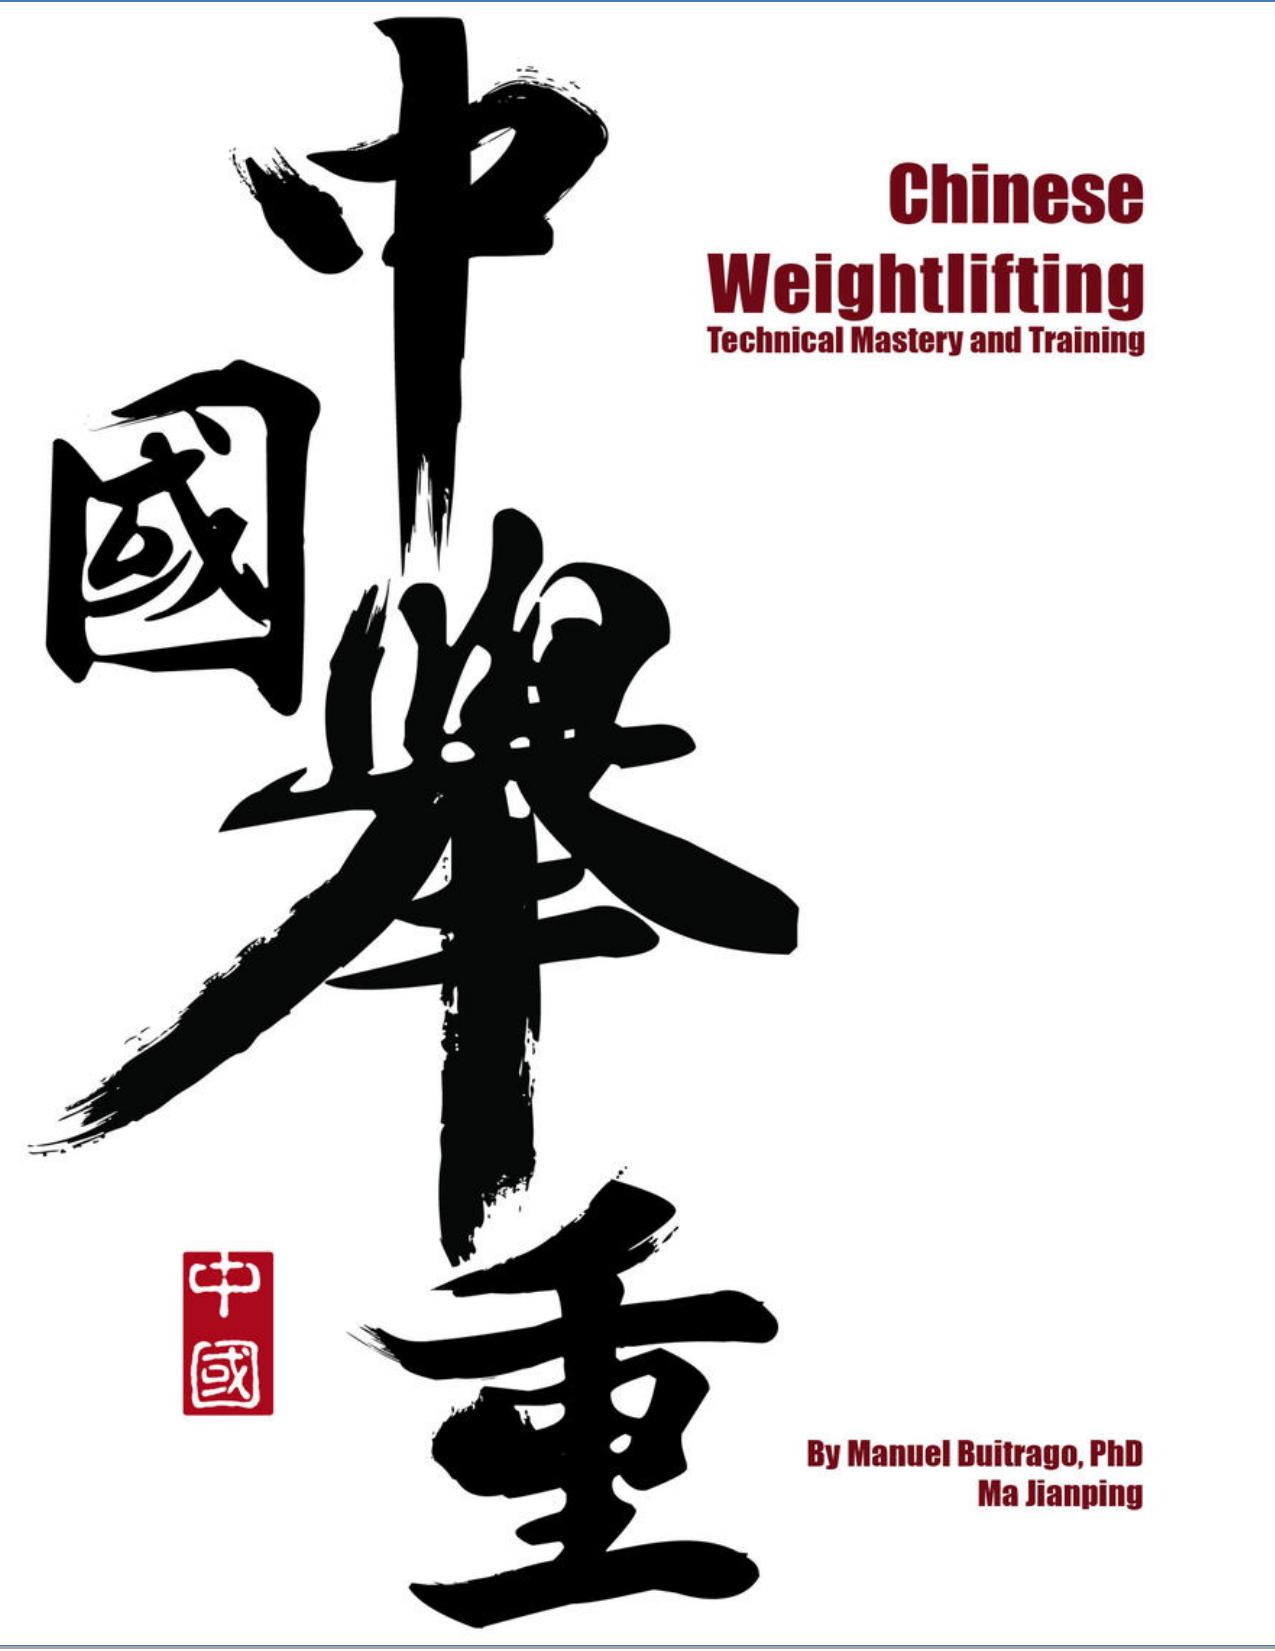 Chinese Weightlifting: Technical Mastery and Training by Manuel Buitrago